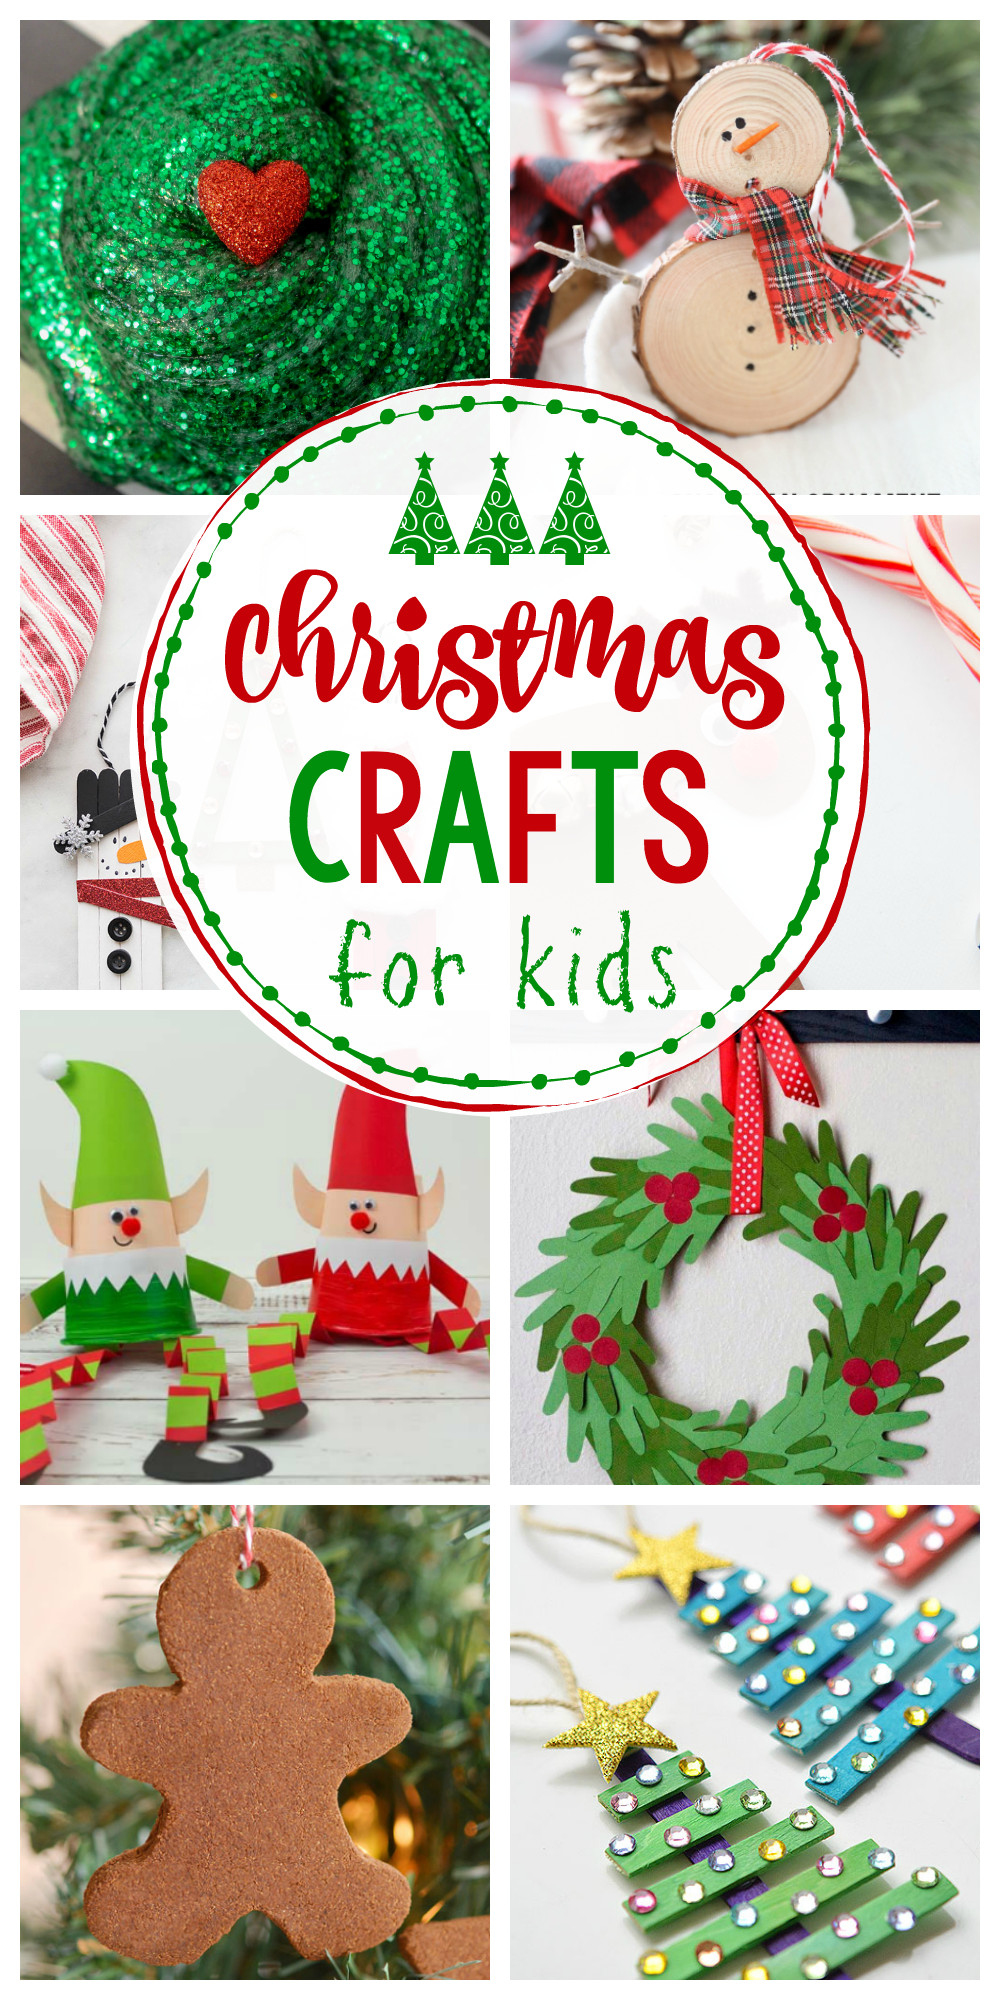 Xmas Craft Ideas For Kids
 25 Easy Christmas Crafts for Kids Crazy Little Projects